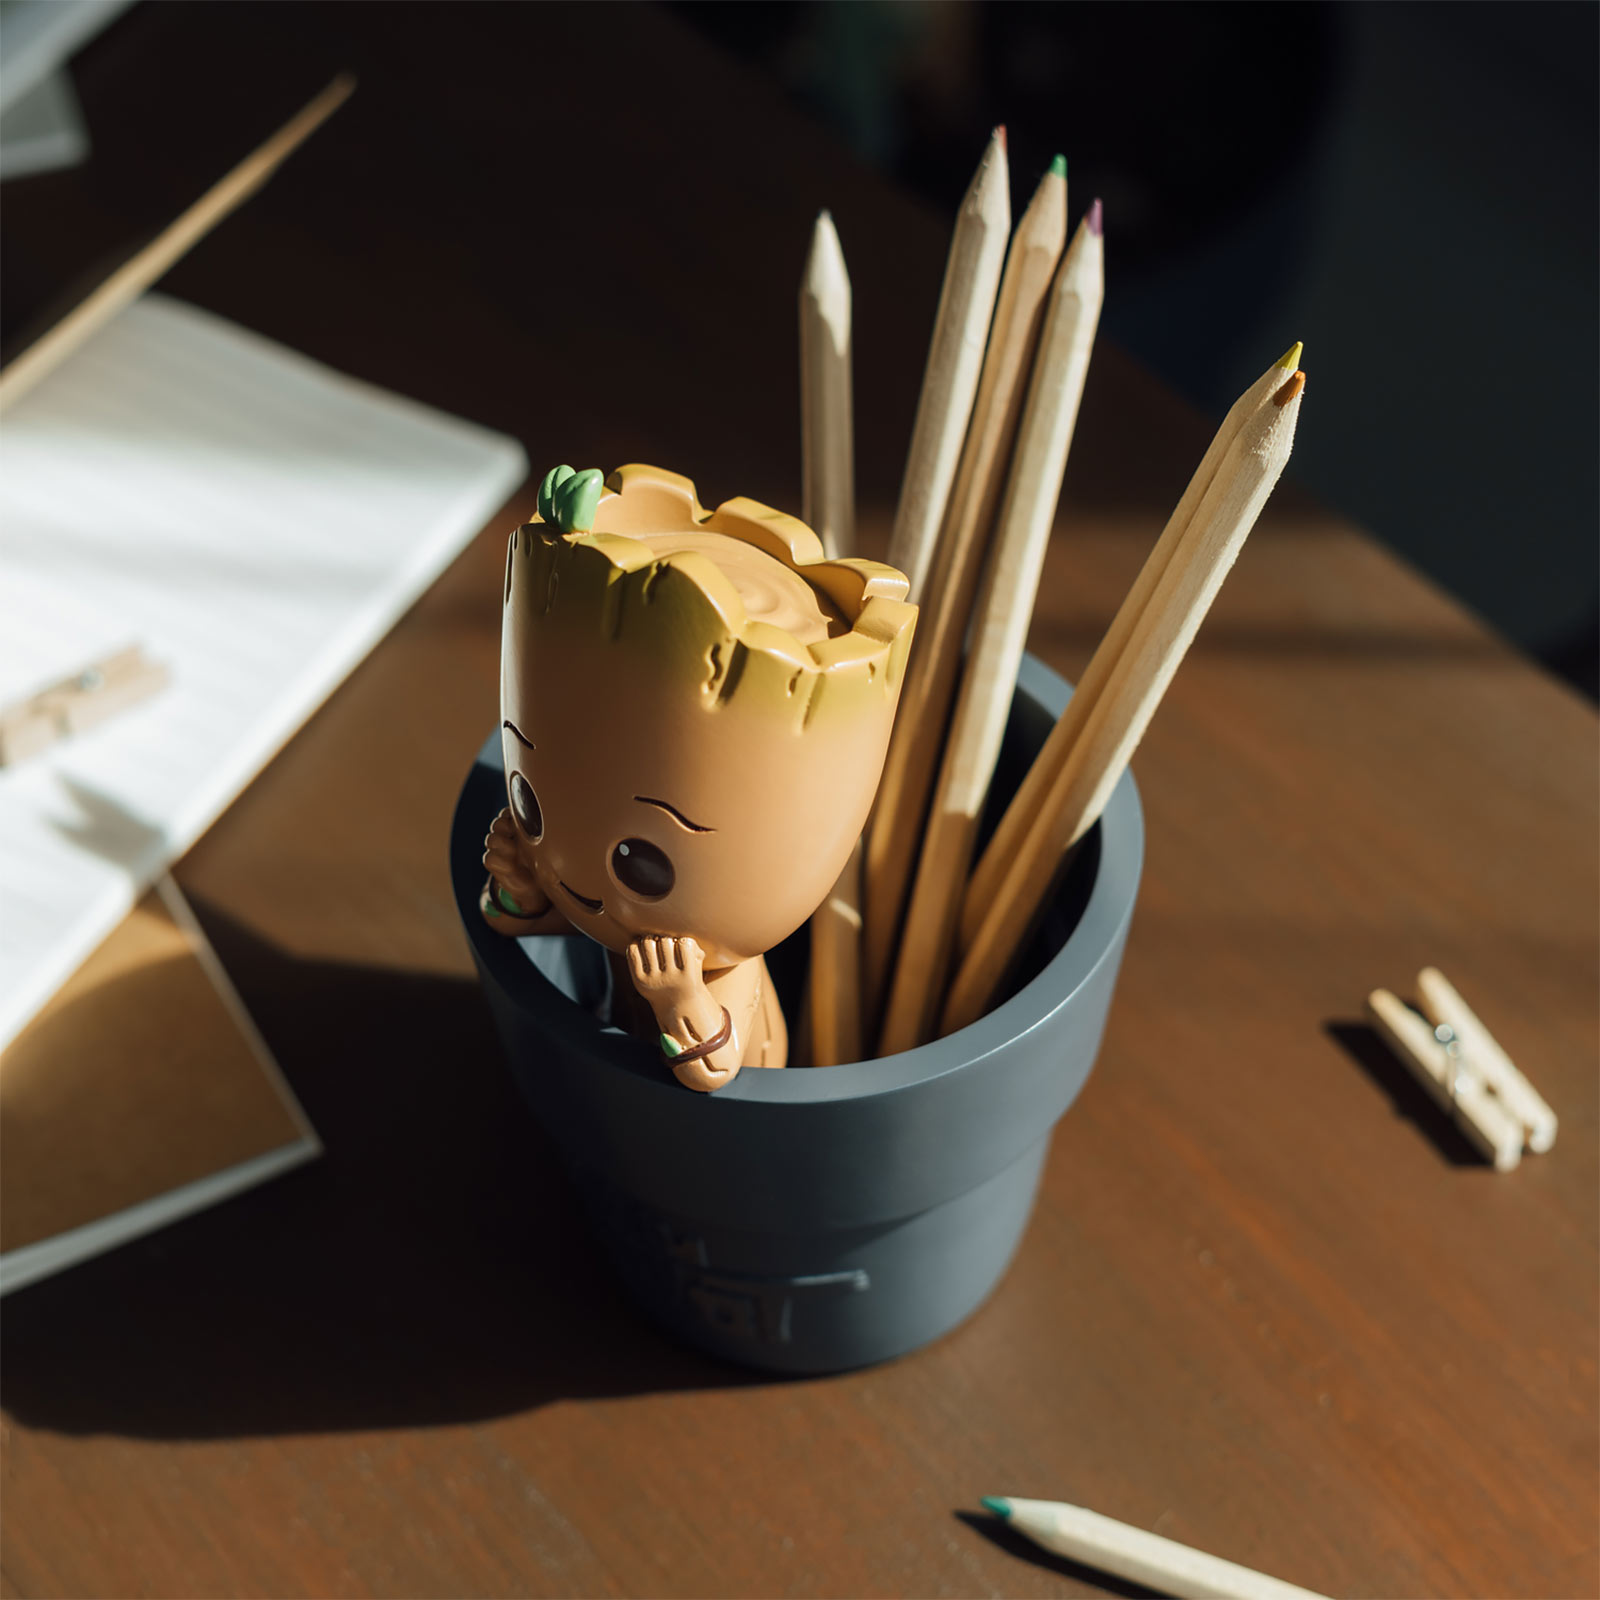 Guardians of the Galaxy - Groot Pen Holder